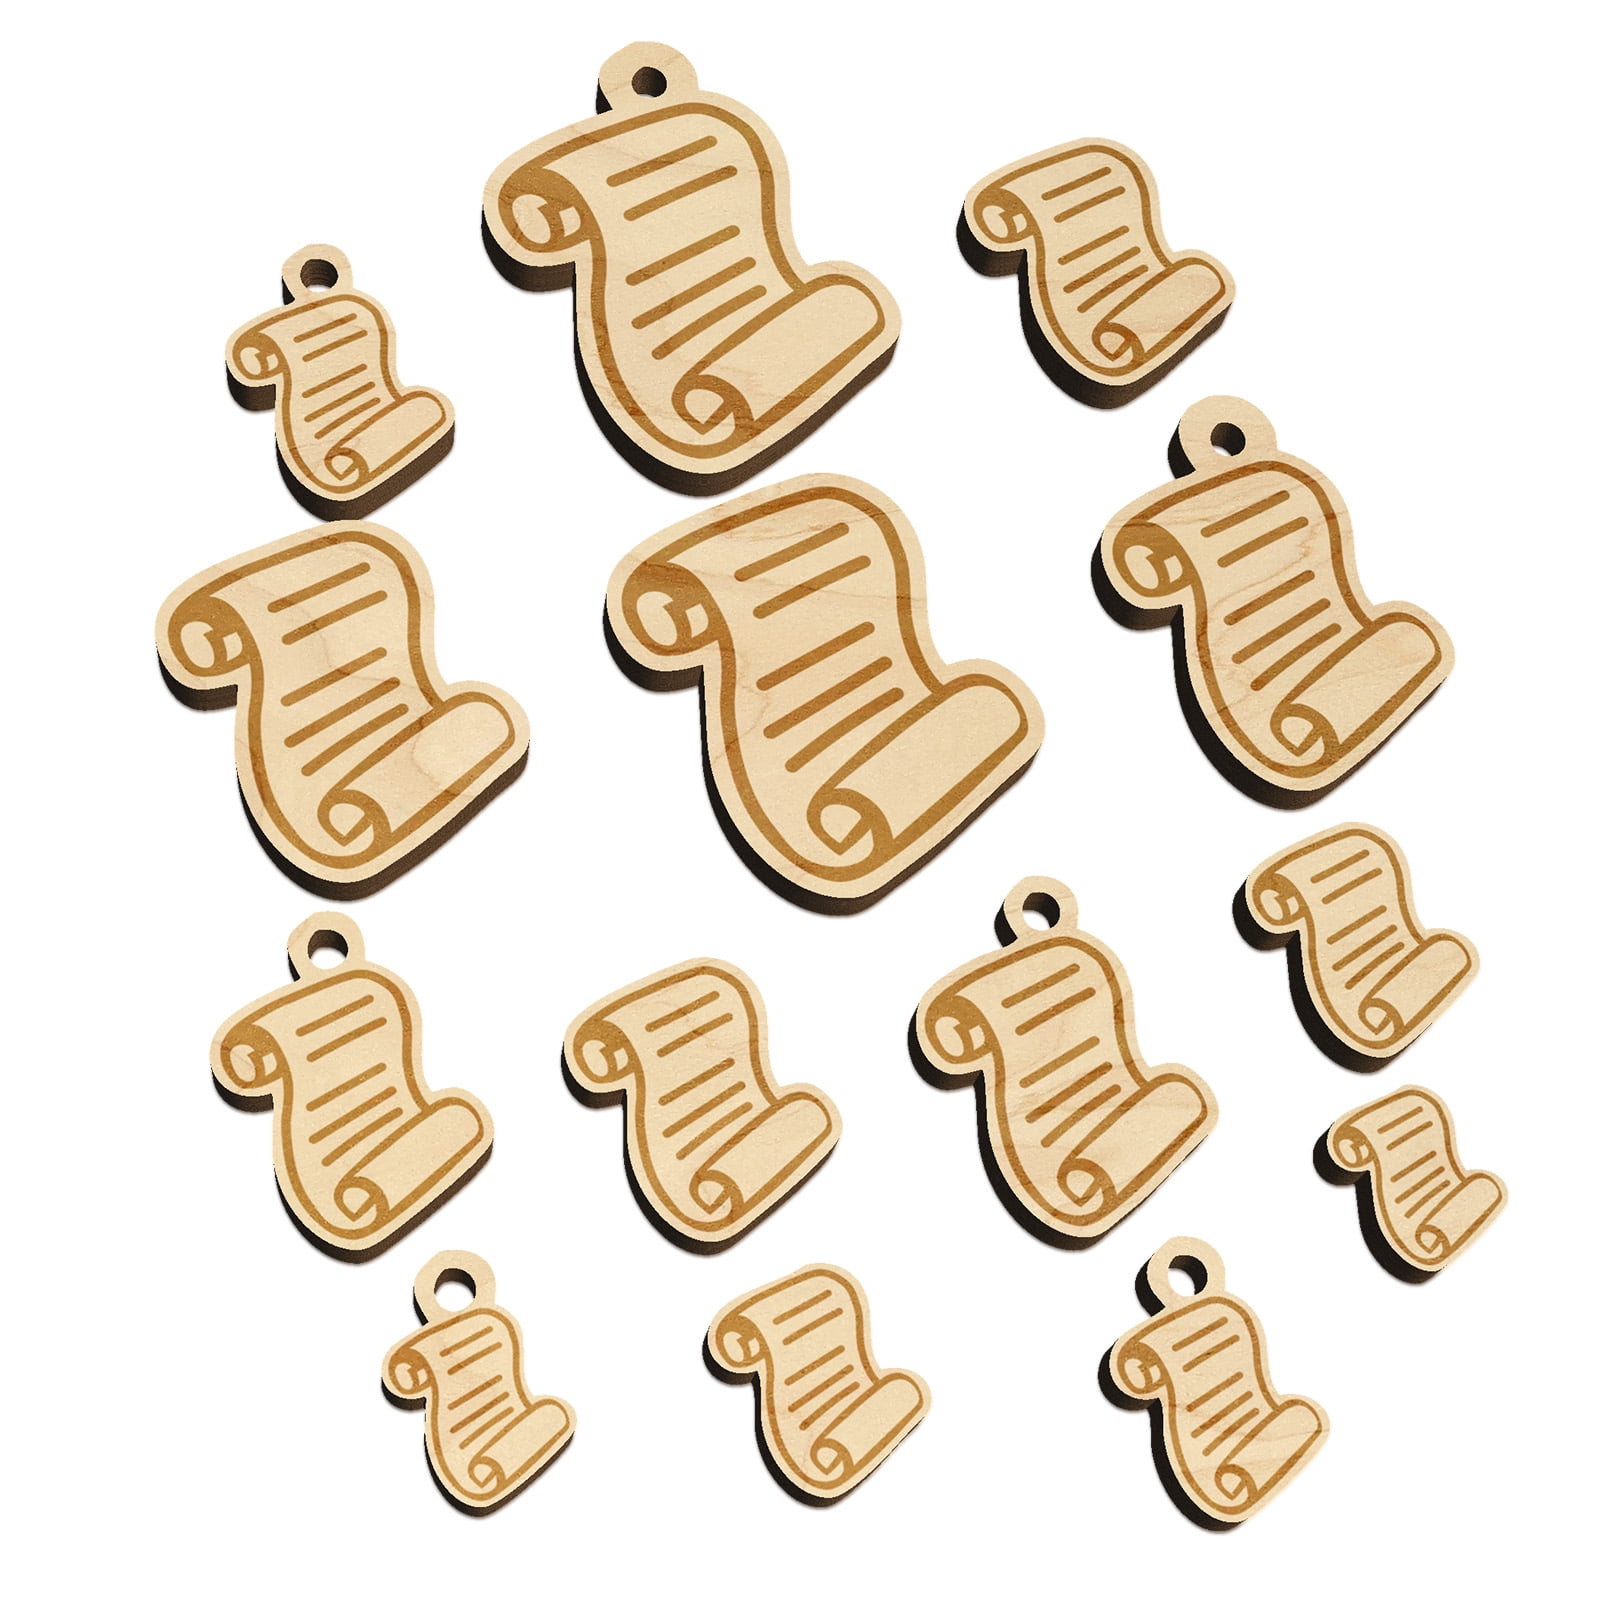 Louisiana State Silhouette Wood Mini Charms Shapes DIY Craft Jewelry - With  Hole - 16mm (22pcs) 